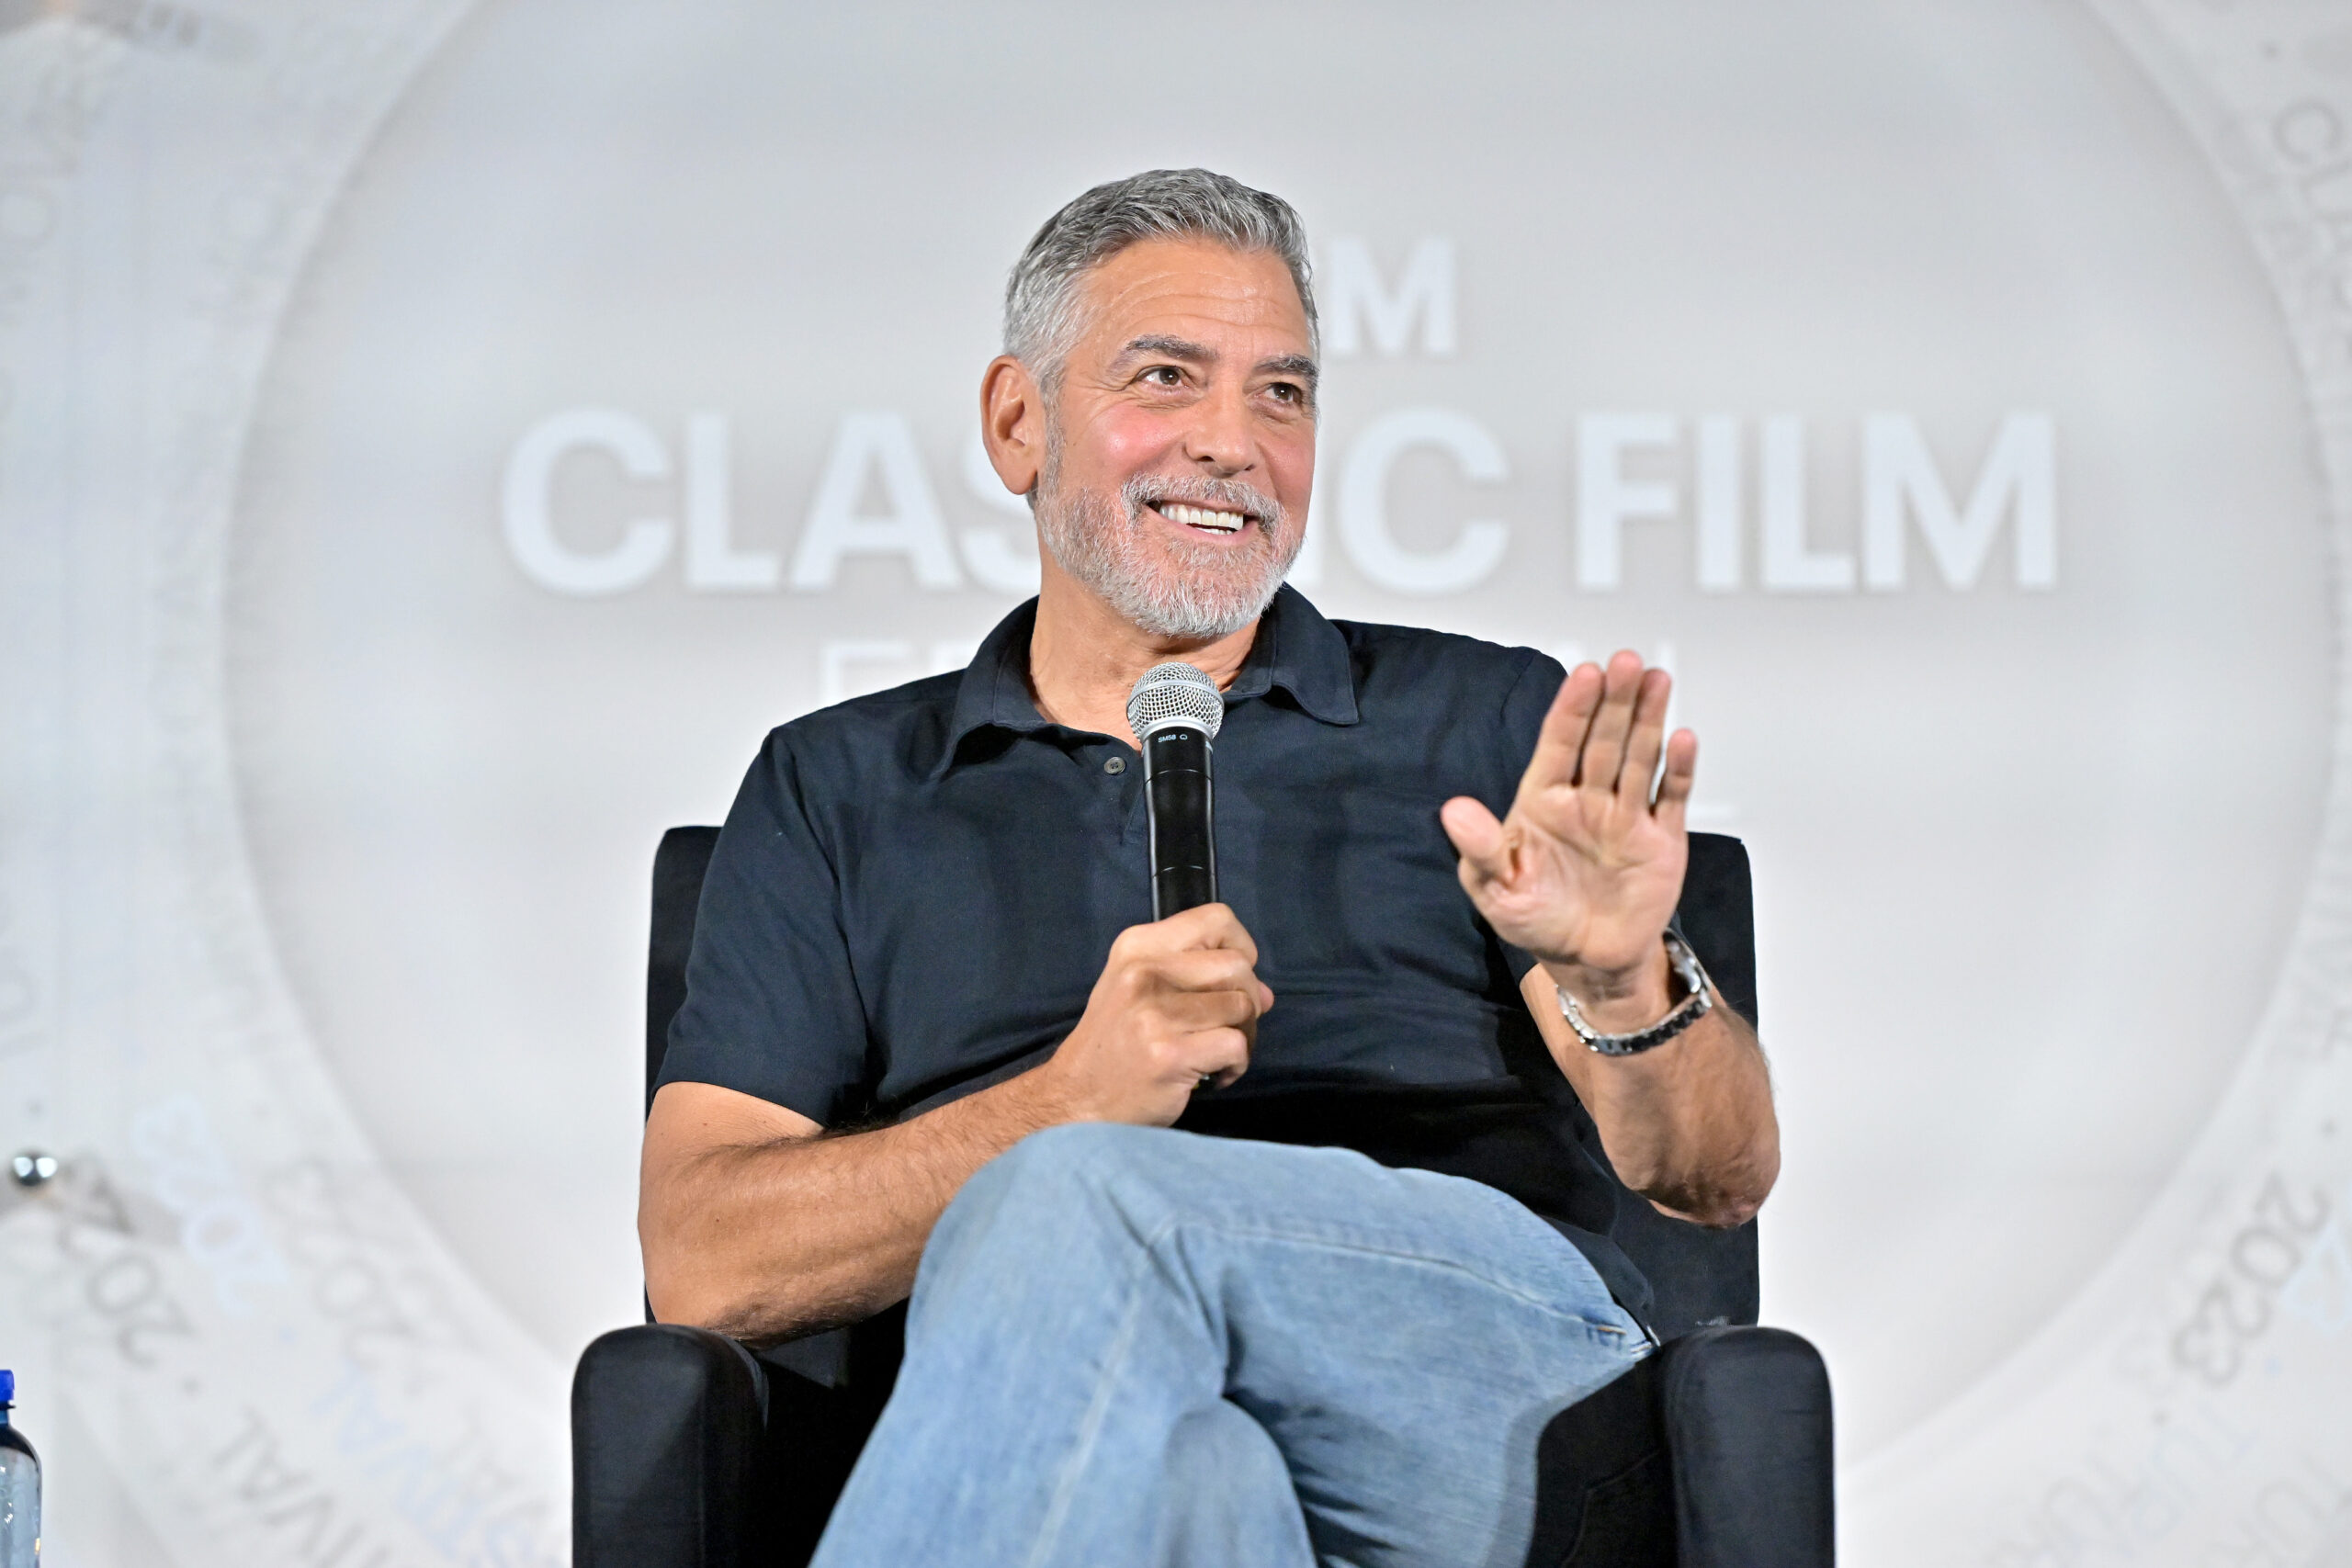 George Clooney Reveals 2 Big Hollywood Stars Told Him To ‘F*** Right Off’ When Offered Roles In ‘Ocean’s Eleven’